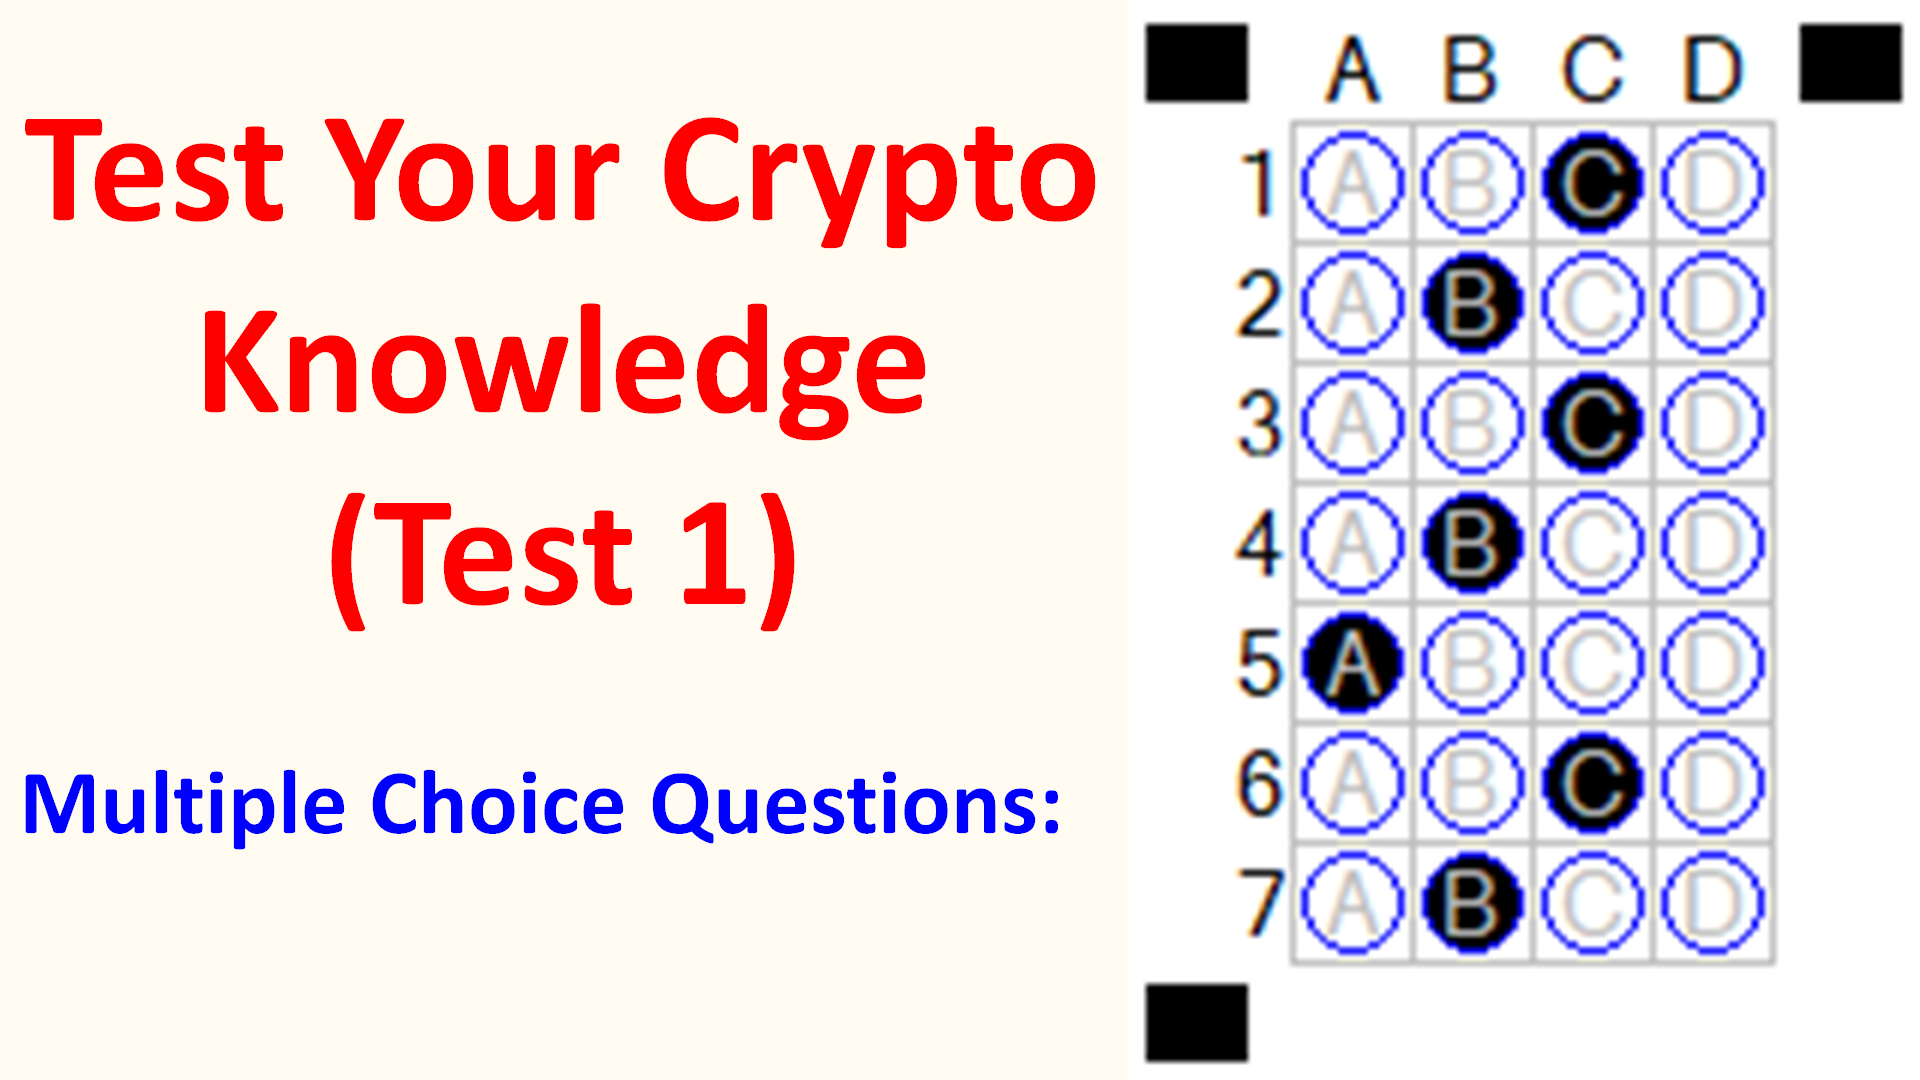 Test Your Crypto Knowledge (Test 1)